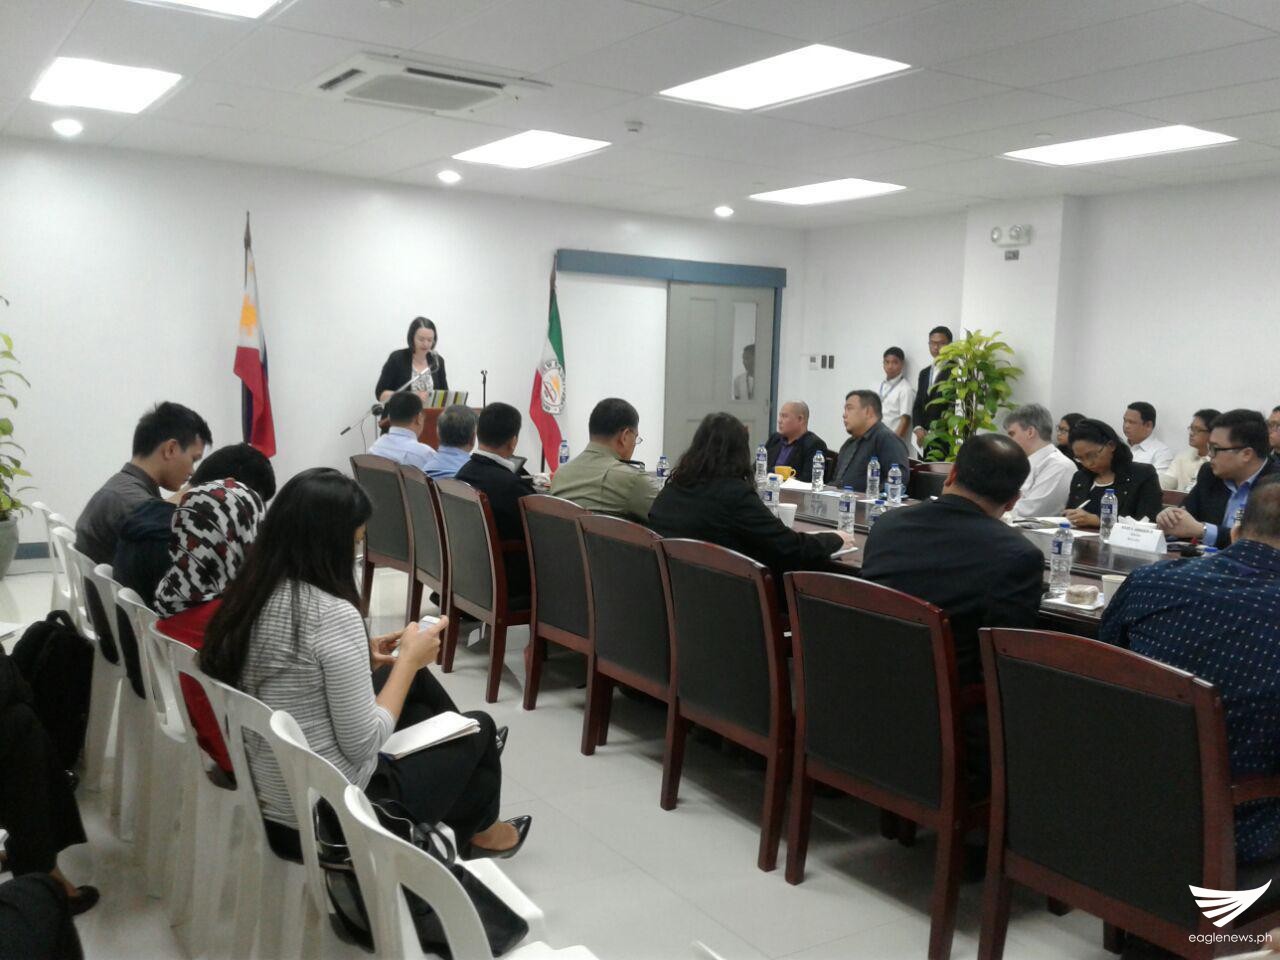 Dr. Ekaterina Koldunova talks about Russia's bilateral and multilateral relations with the Philippines and ASEAN, during a roundtable discussion held on Friday, November 25, at the New Era University's ASEAN Studies Center in Quezon City. (Eagle News Service)